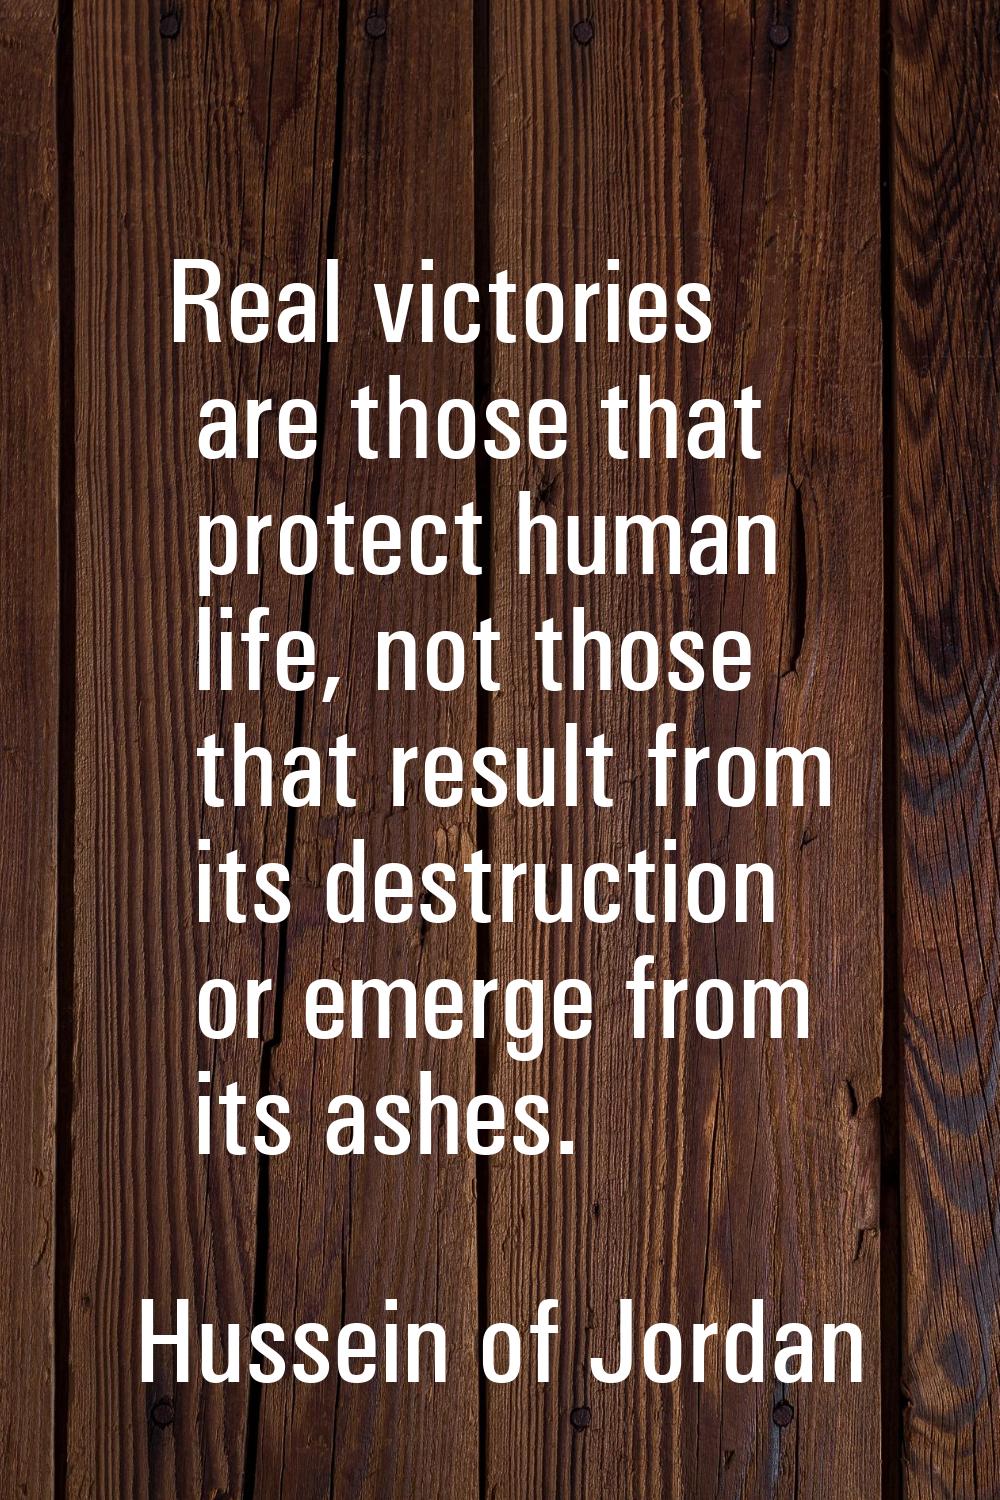 Real victories are those that protect human life, not those that result from its destruction or eme